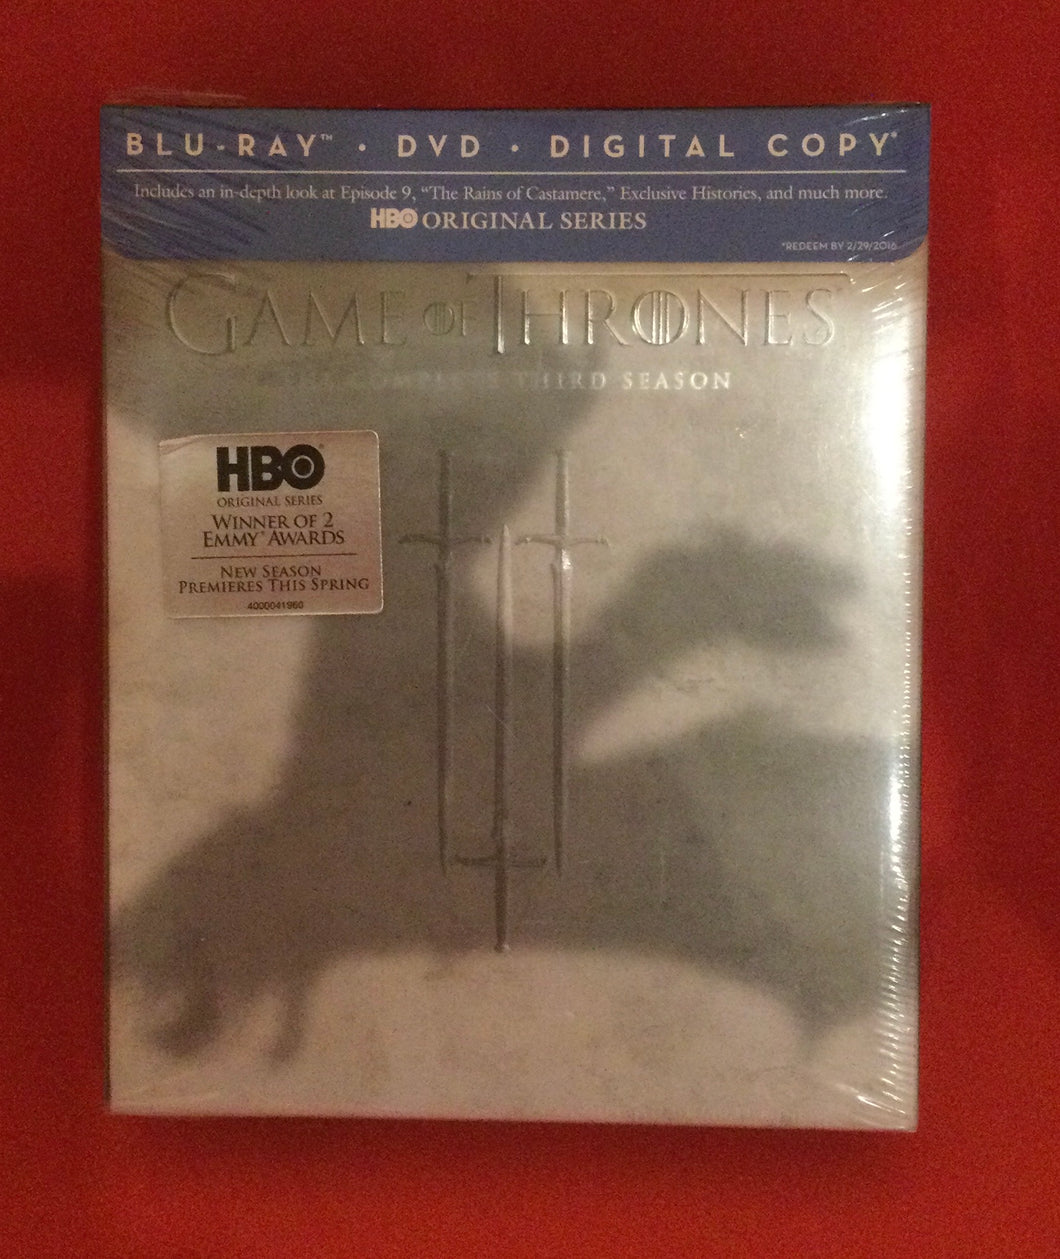 GAME OF THRONES: The Complete Third Season NEW/SEALED BLU-RAY